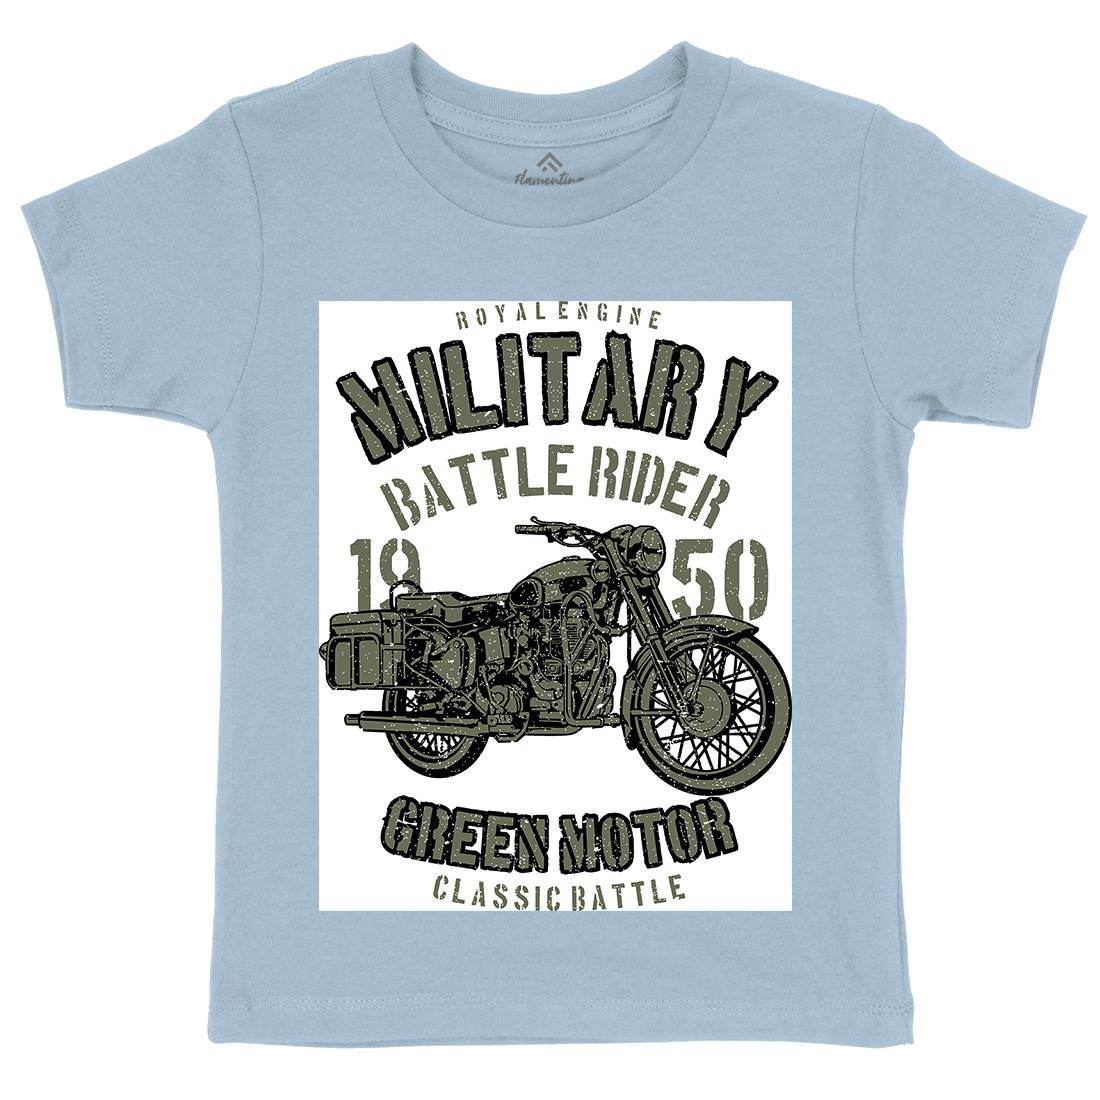 Green Military Ride Kids Crew Neck T-Shirt Army A678